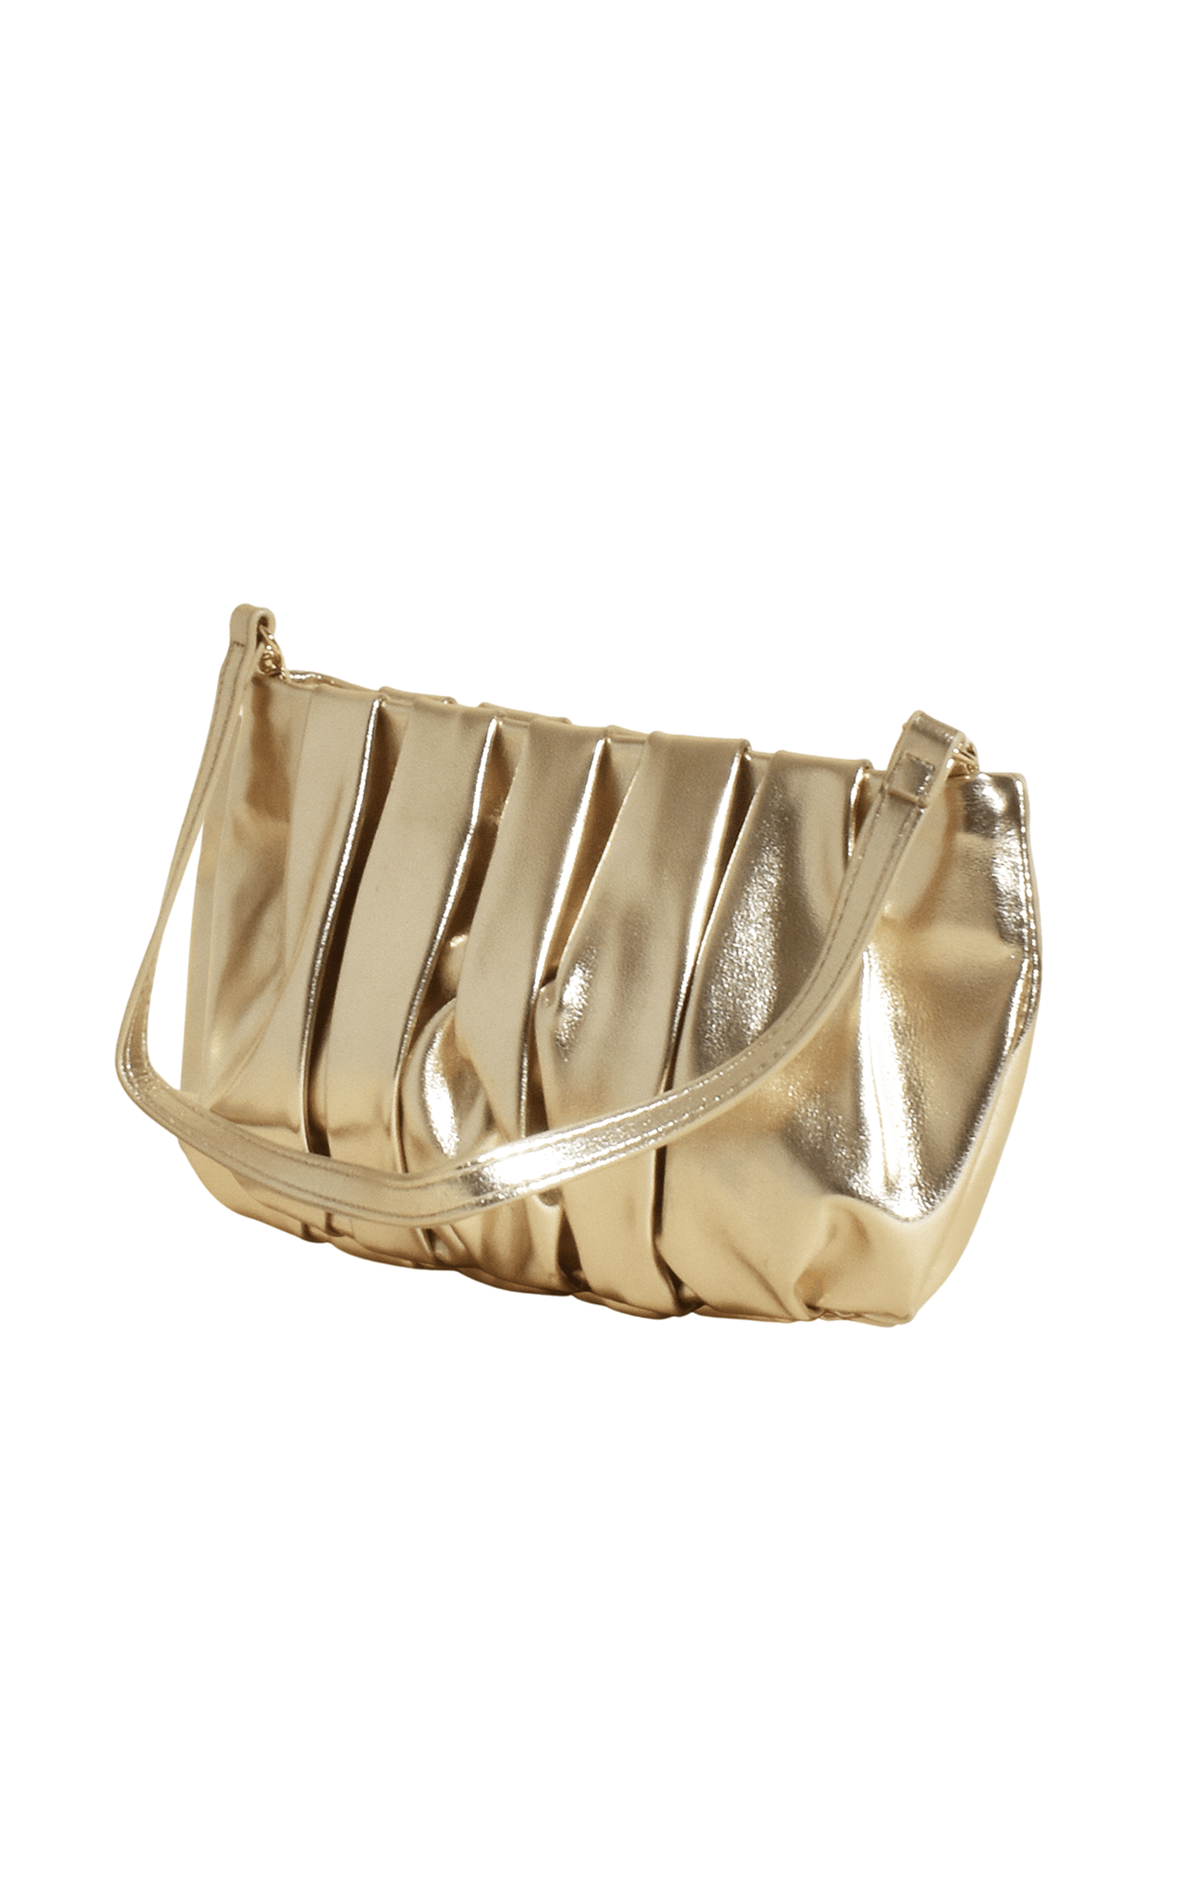 ACCESSORIES Bags Clutches One Size / Neutral TARA GATHERED HANDBAG IN GOLD